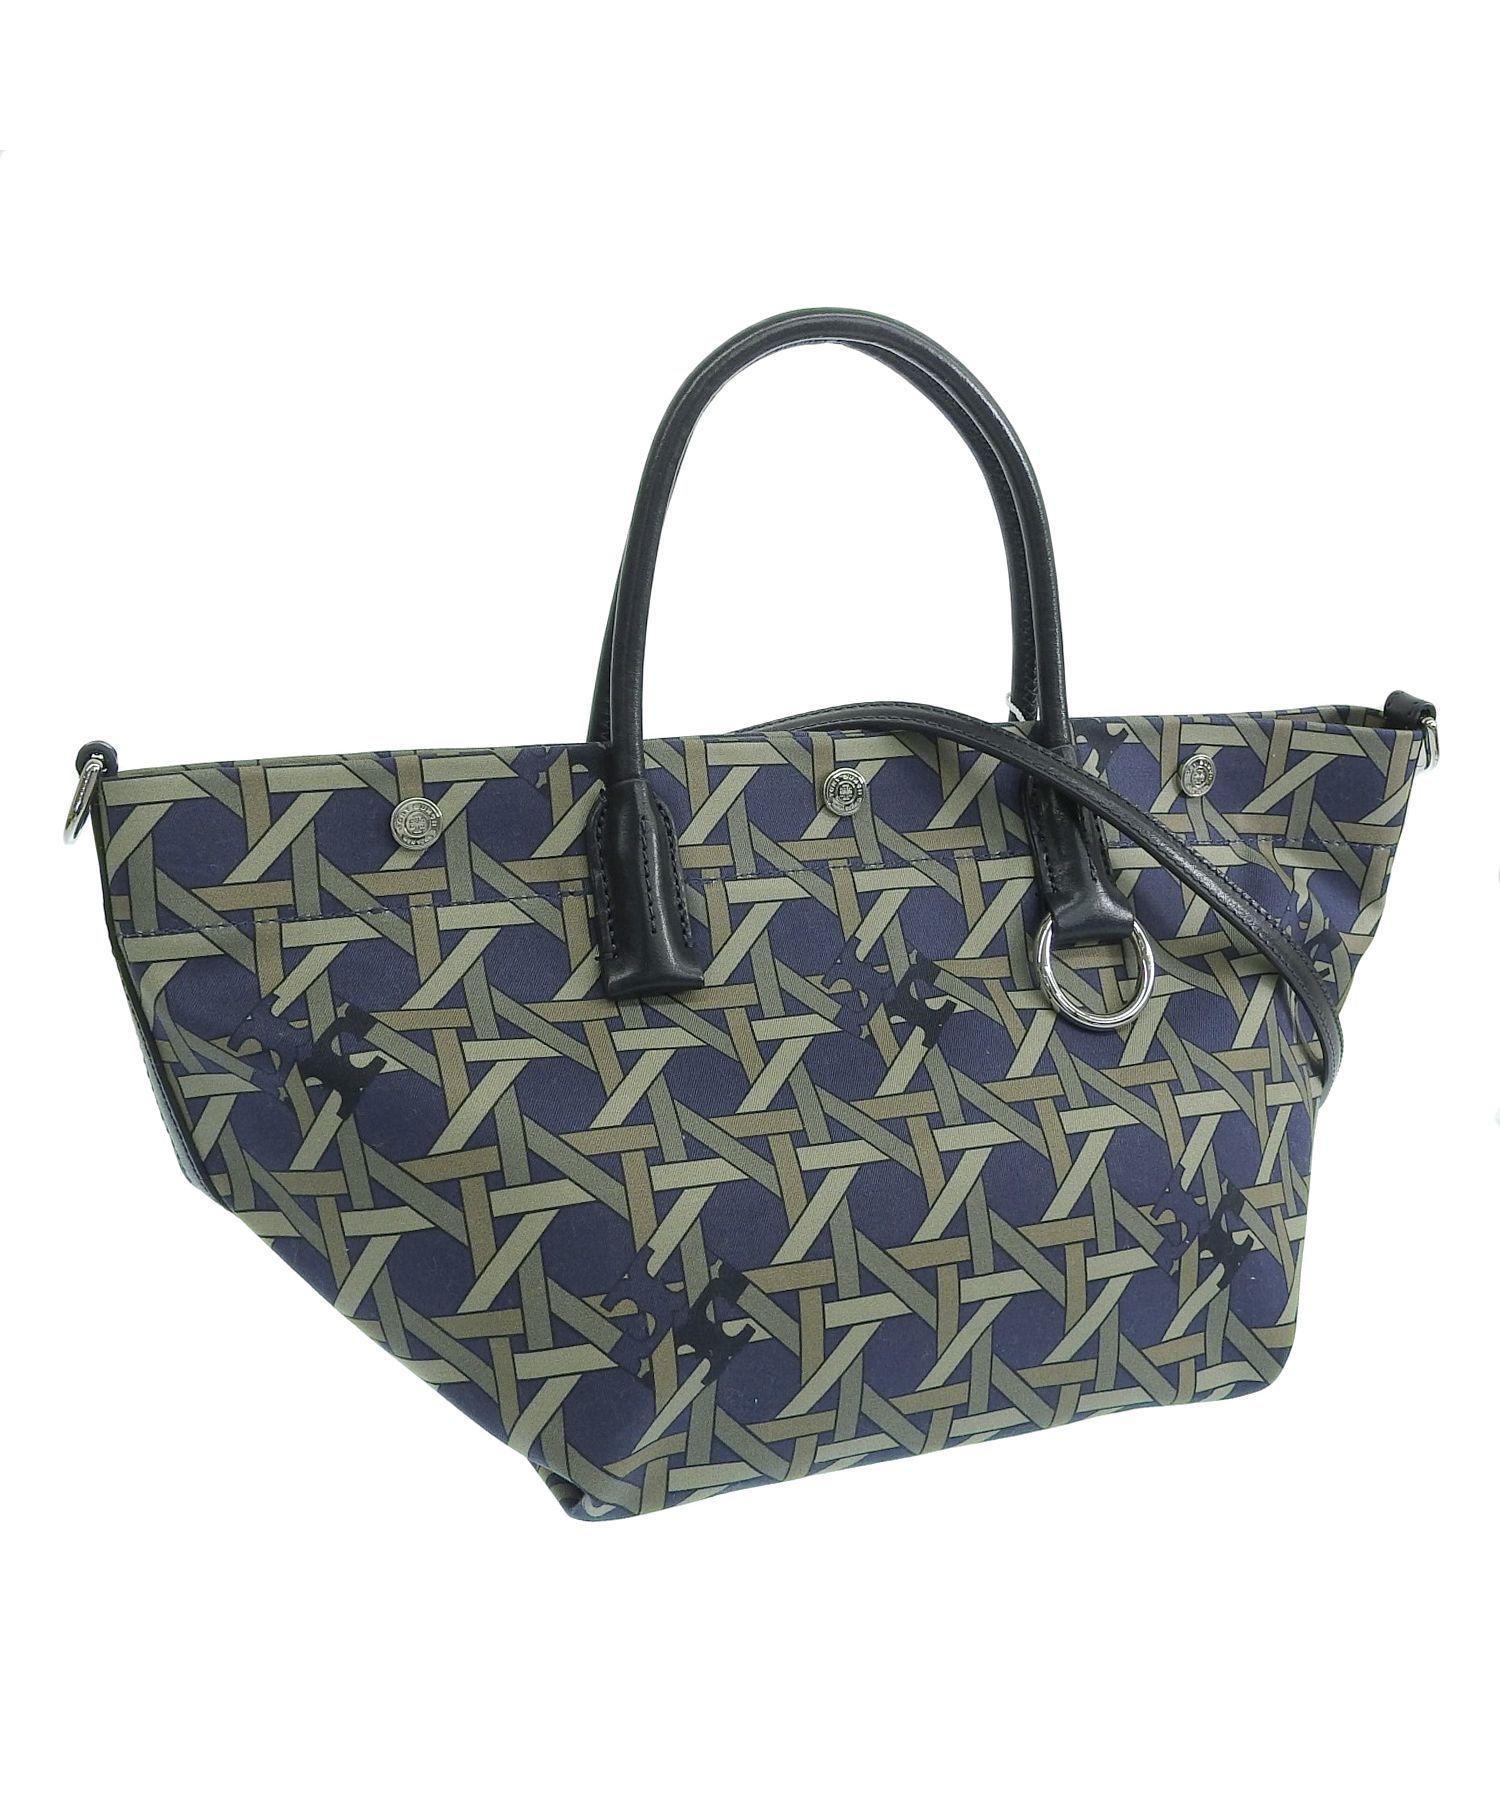 TORY BURCH トリーバーチ CANVAS BASKET WEAVE SMALL TOTE バスケット